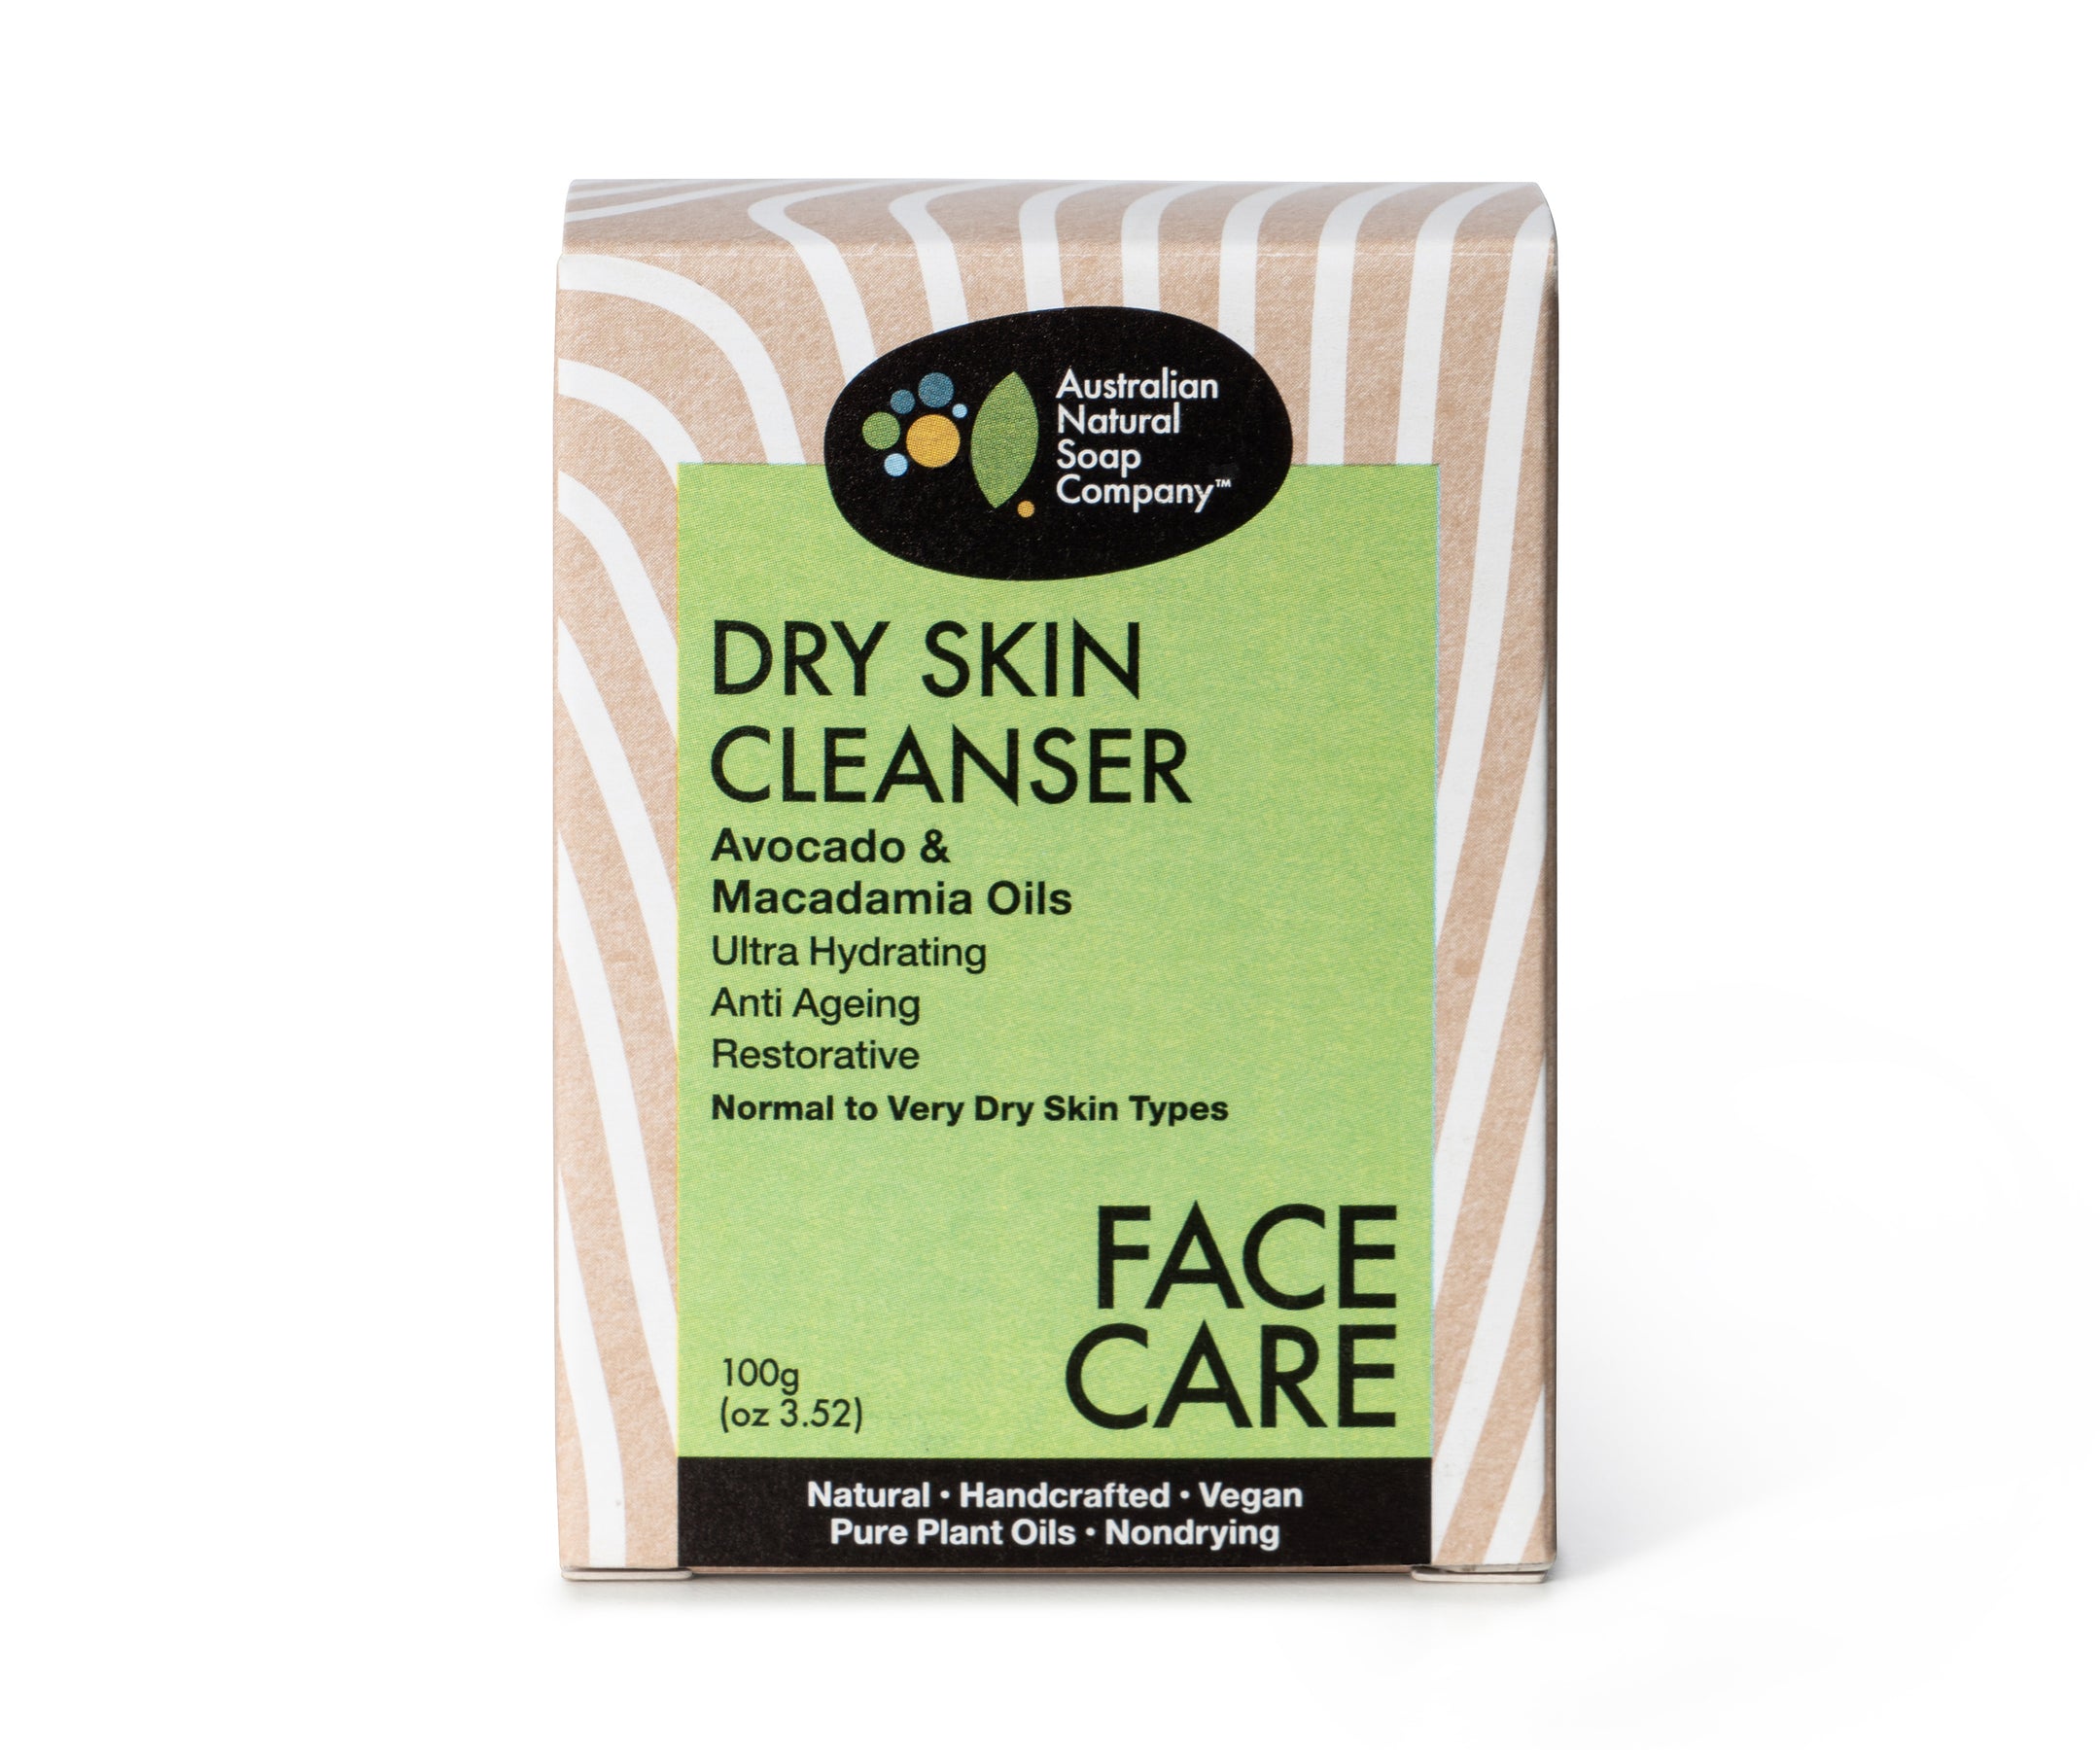 Australian Natural Soap Company Dry Skin Face Cleanser Bar Front of Box